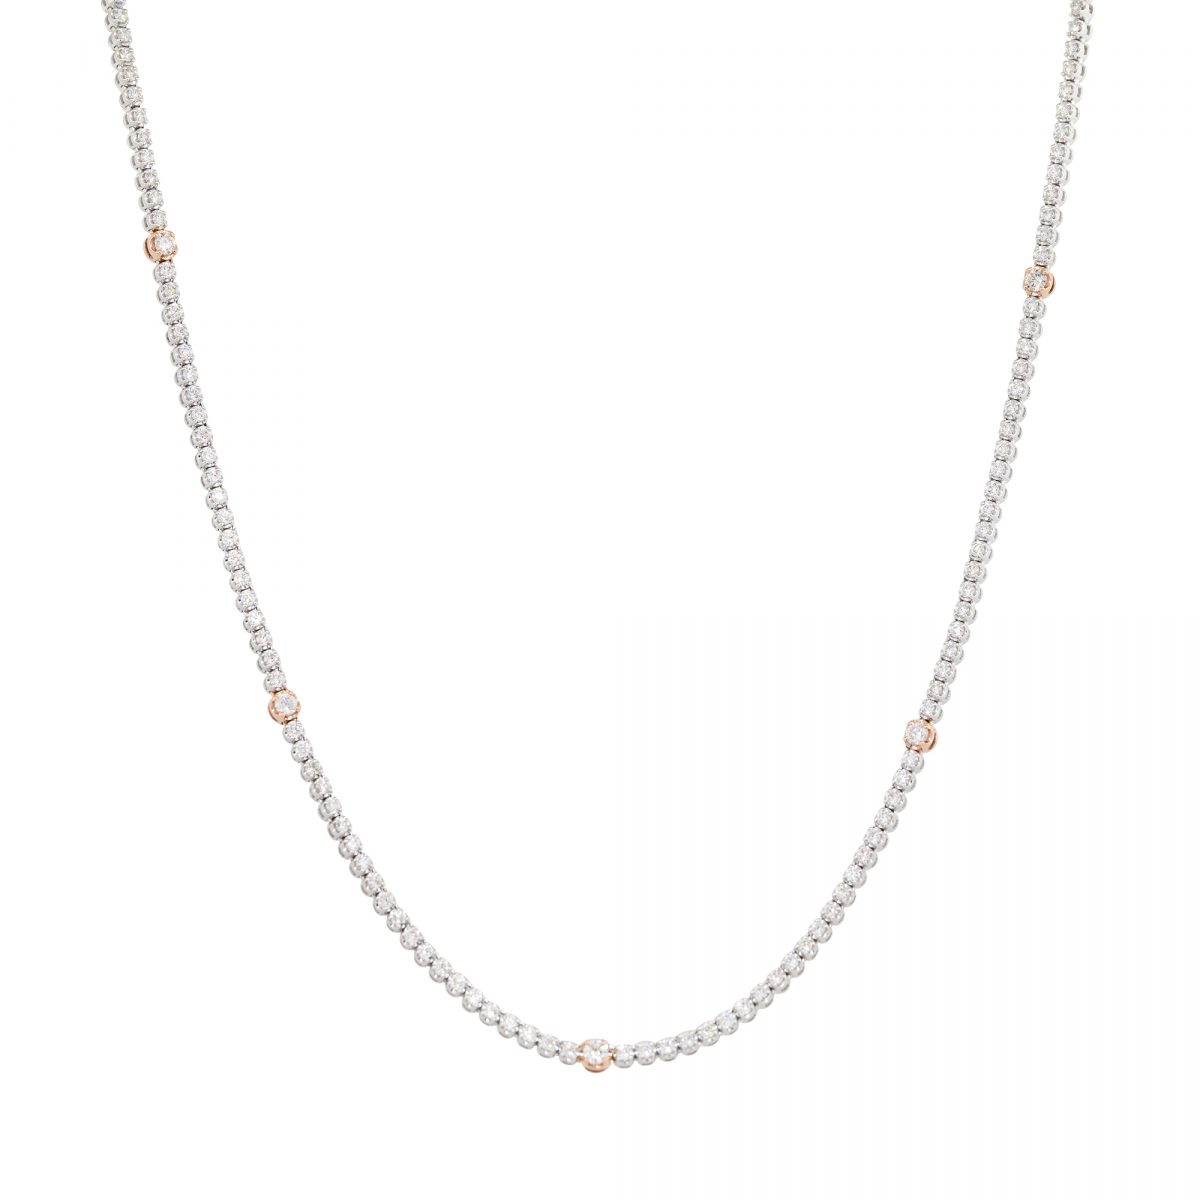 14k White Gold 3.69ctw Diamond Tennis Necklace with Rose Gold Diamond Stations